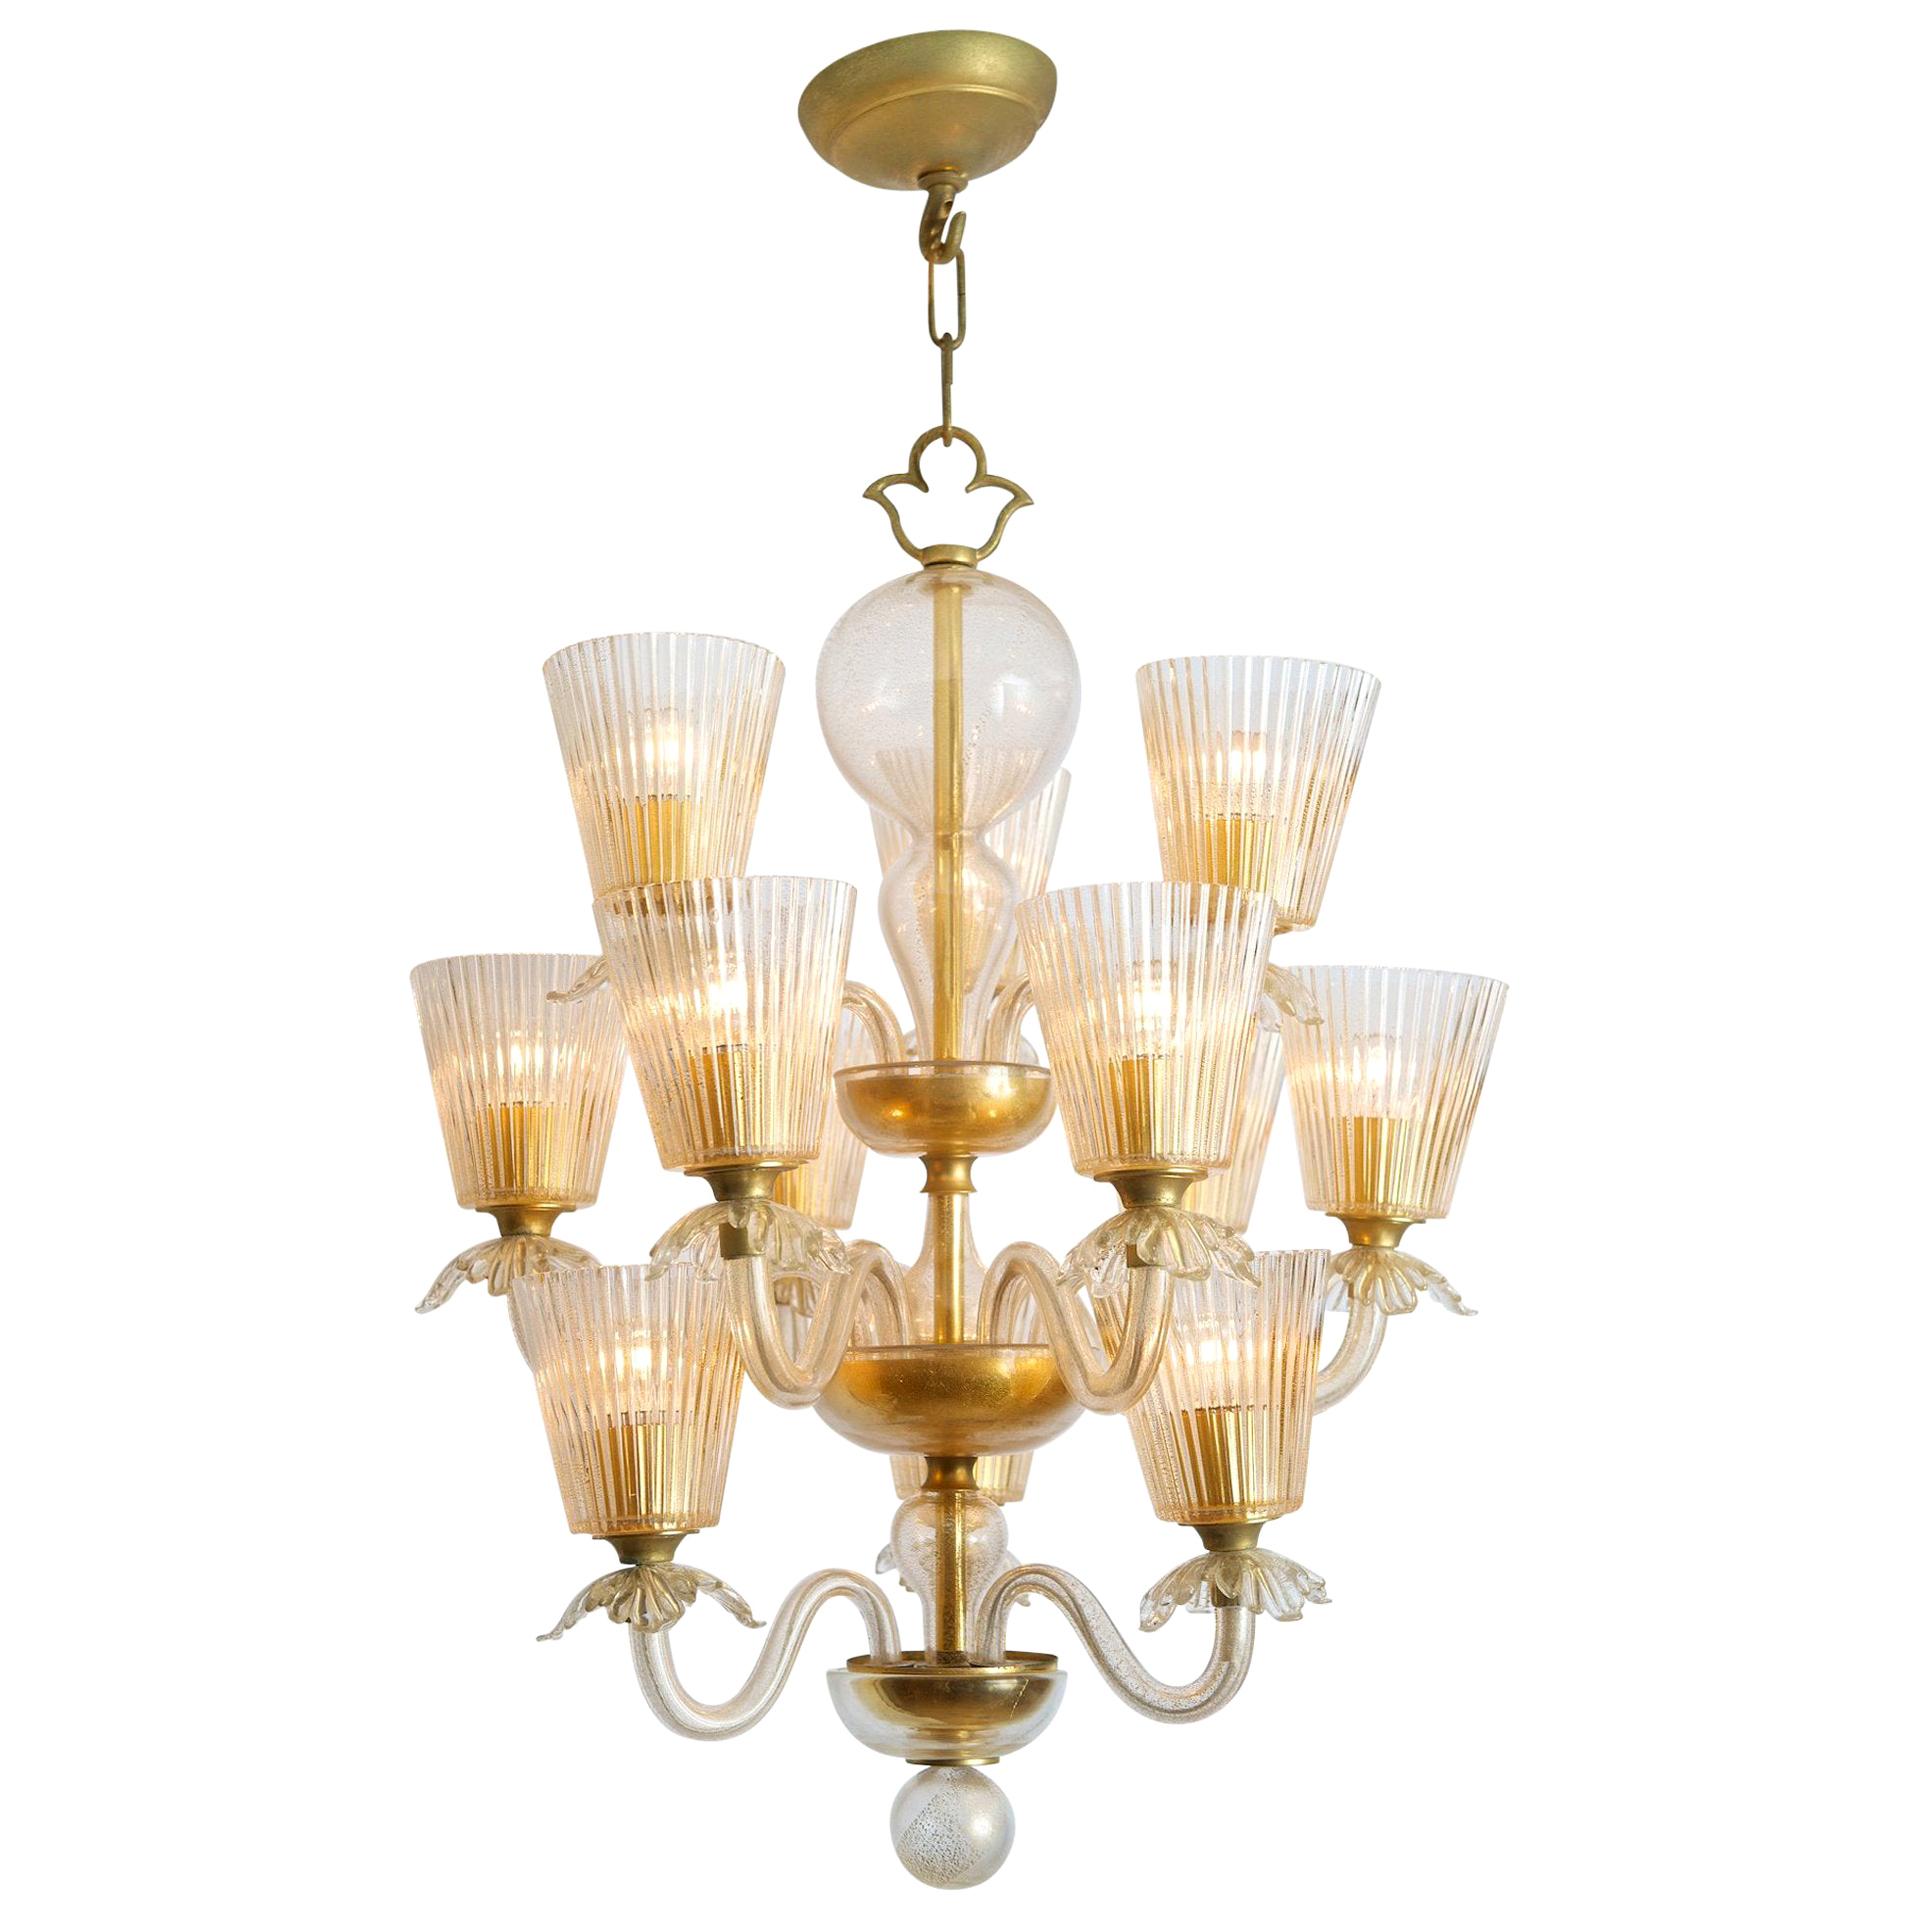 Twelve-Arm Chandelier in Blown Glass with Gold Inclusions